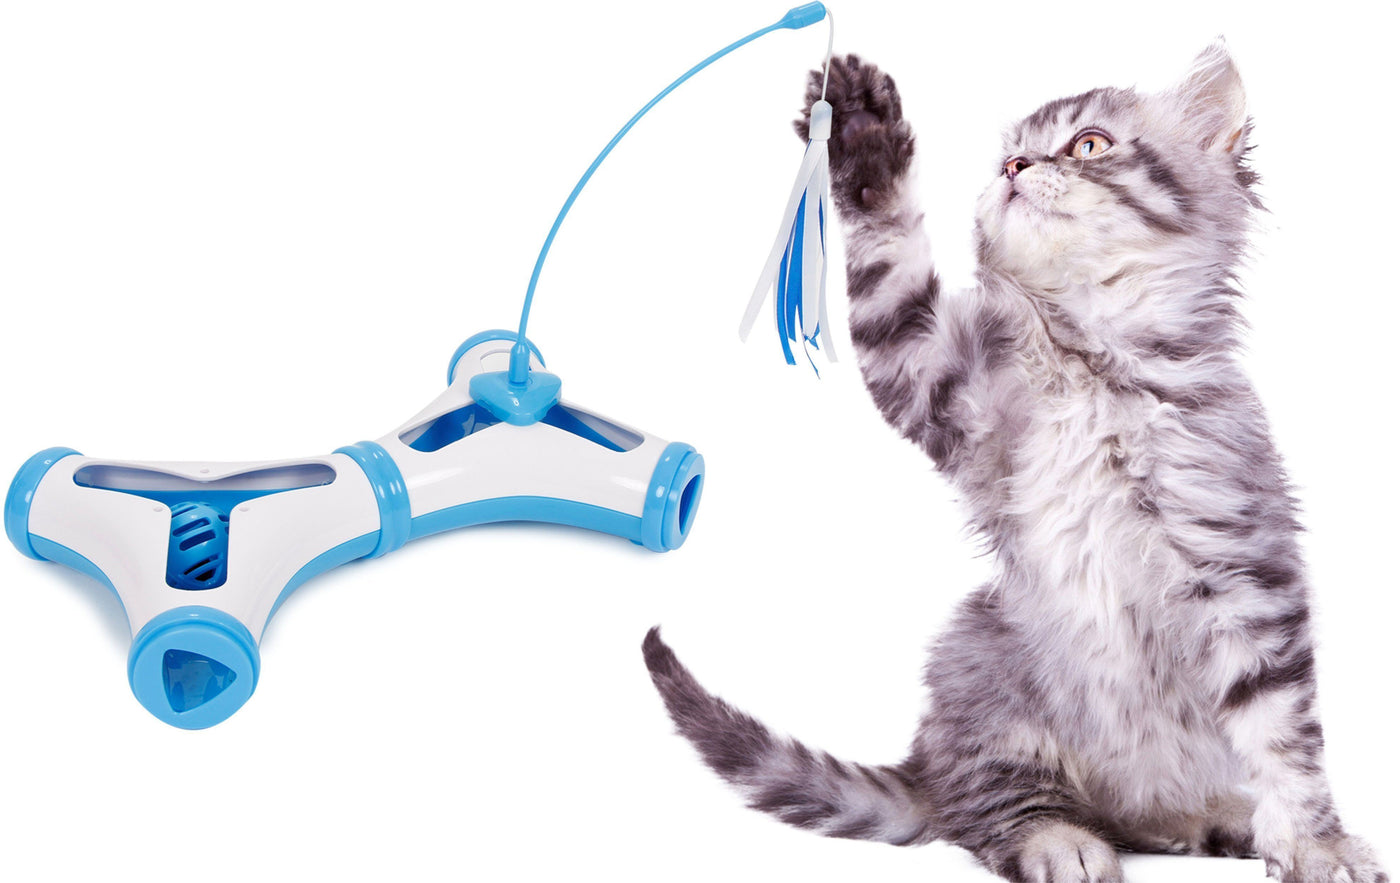 Pet Life 'Windmill' Rotating Suction Cup Spinning Cat Toy - Yellow